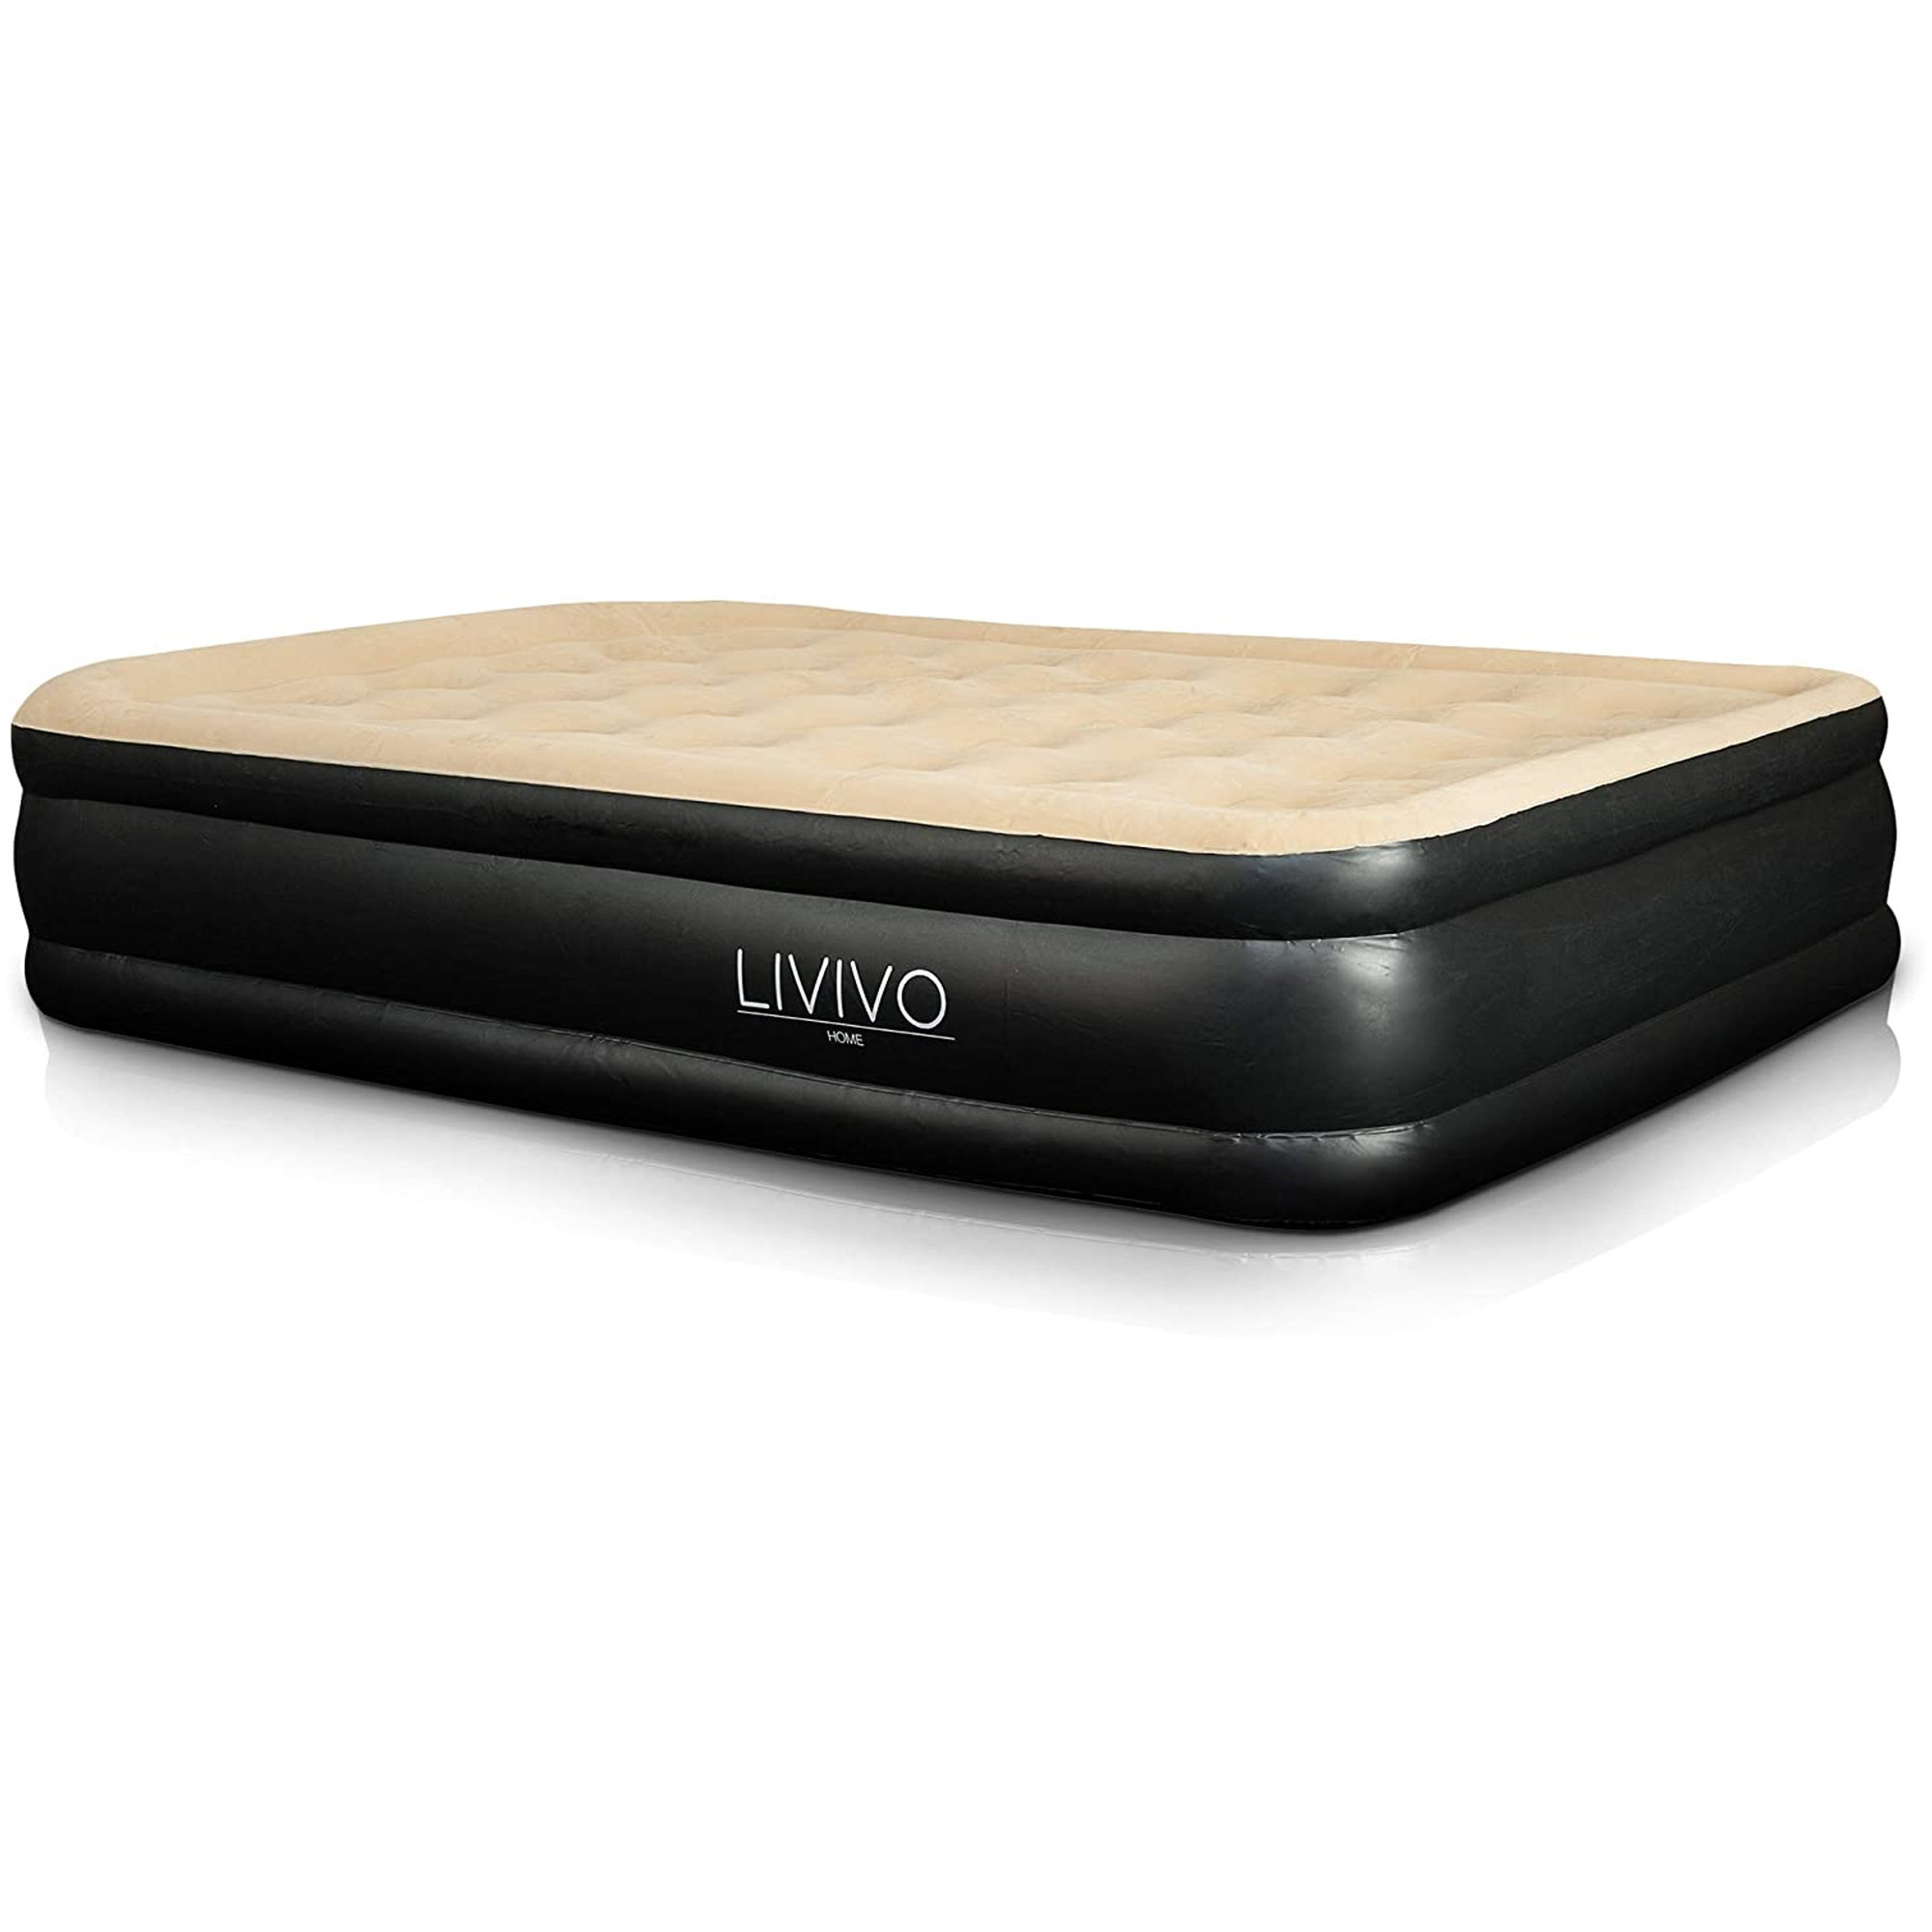 LIVIVO Luxury Flocked Air Bed Mattress Portable Inflatable Double Airbed with Built-in Electric Pump Elevated Raised & Structured Air Coil Technology 